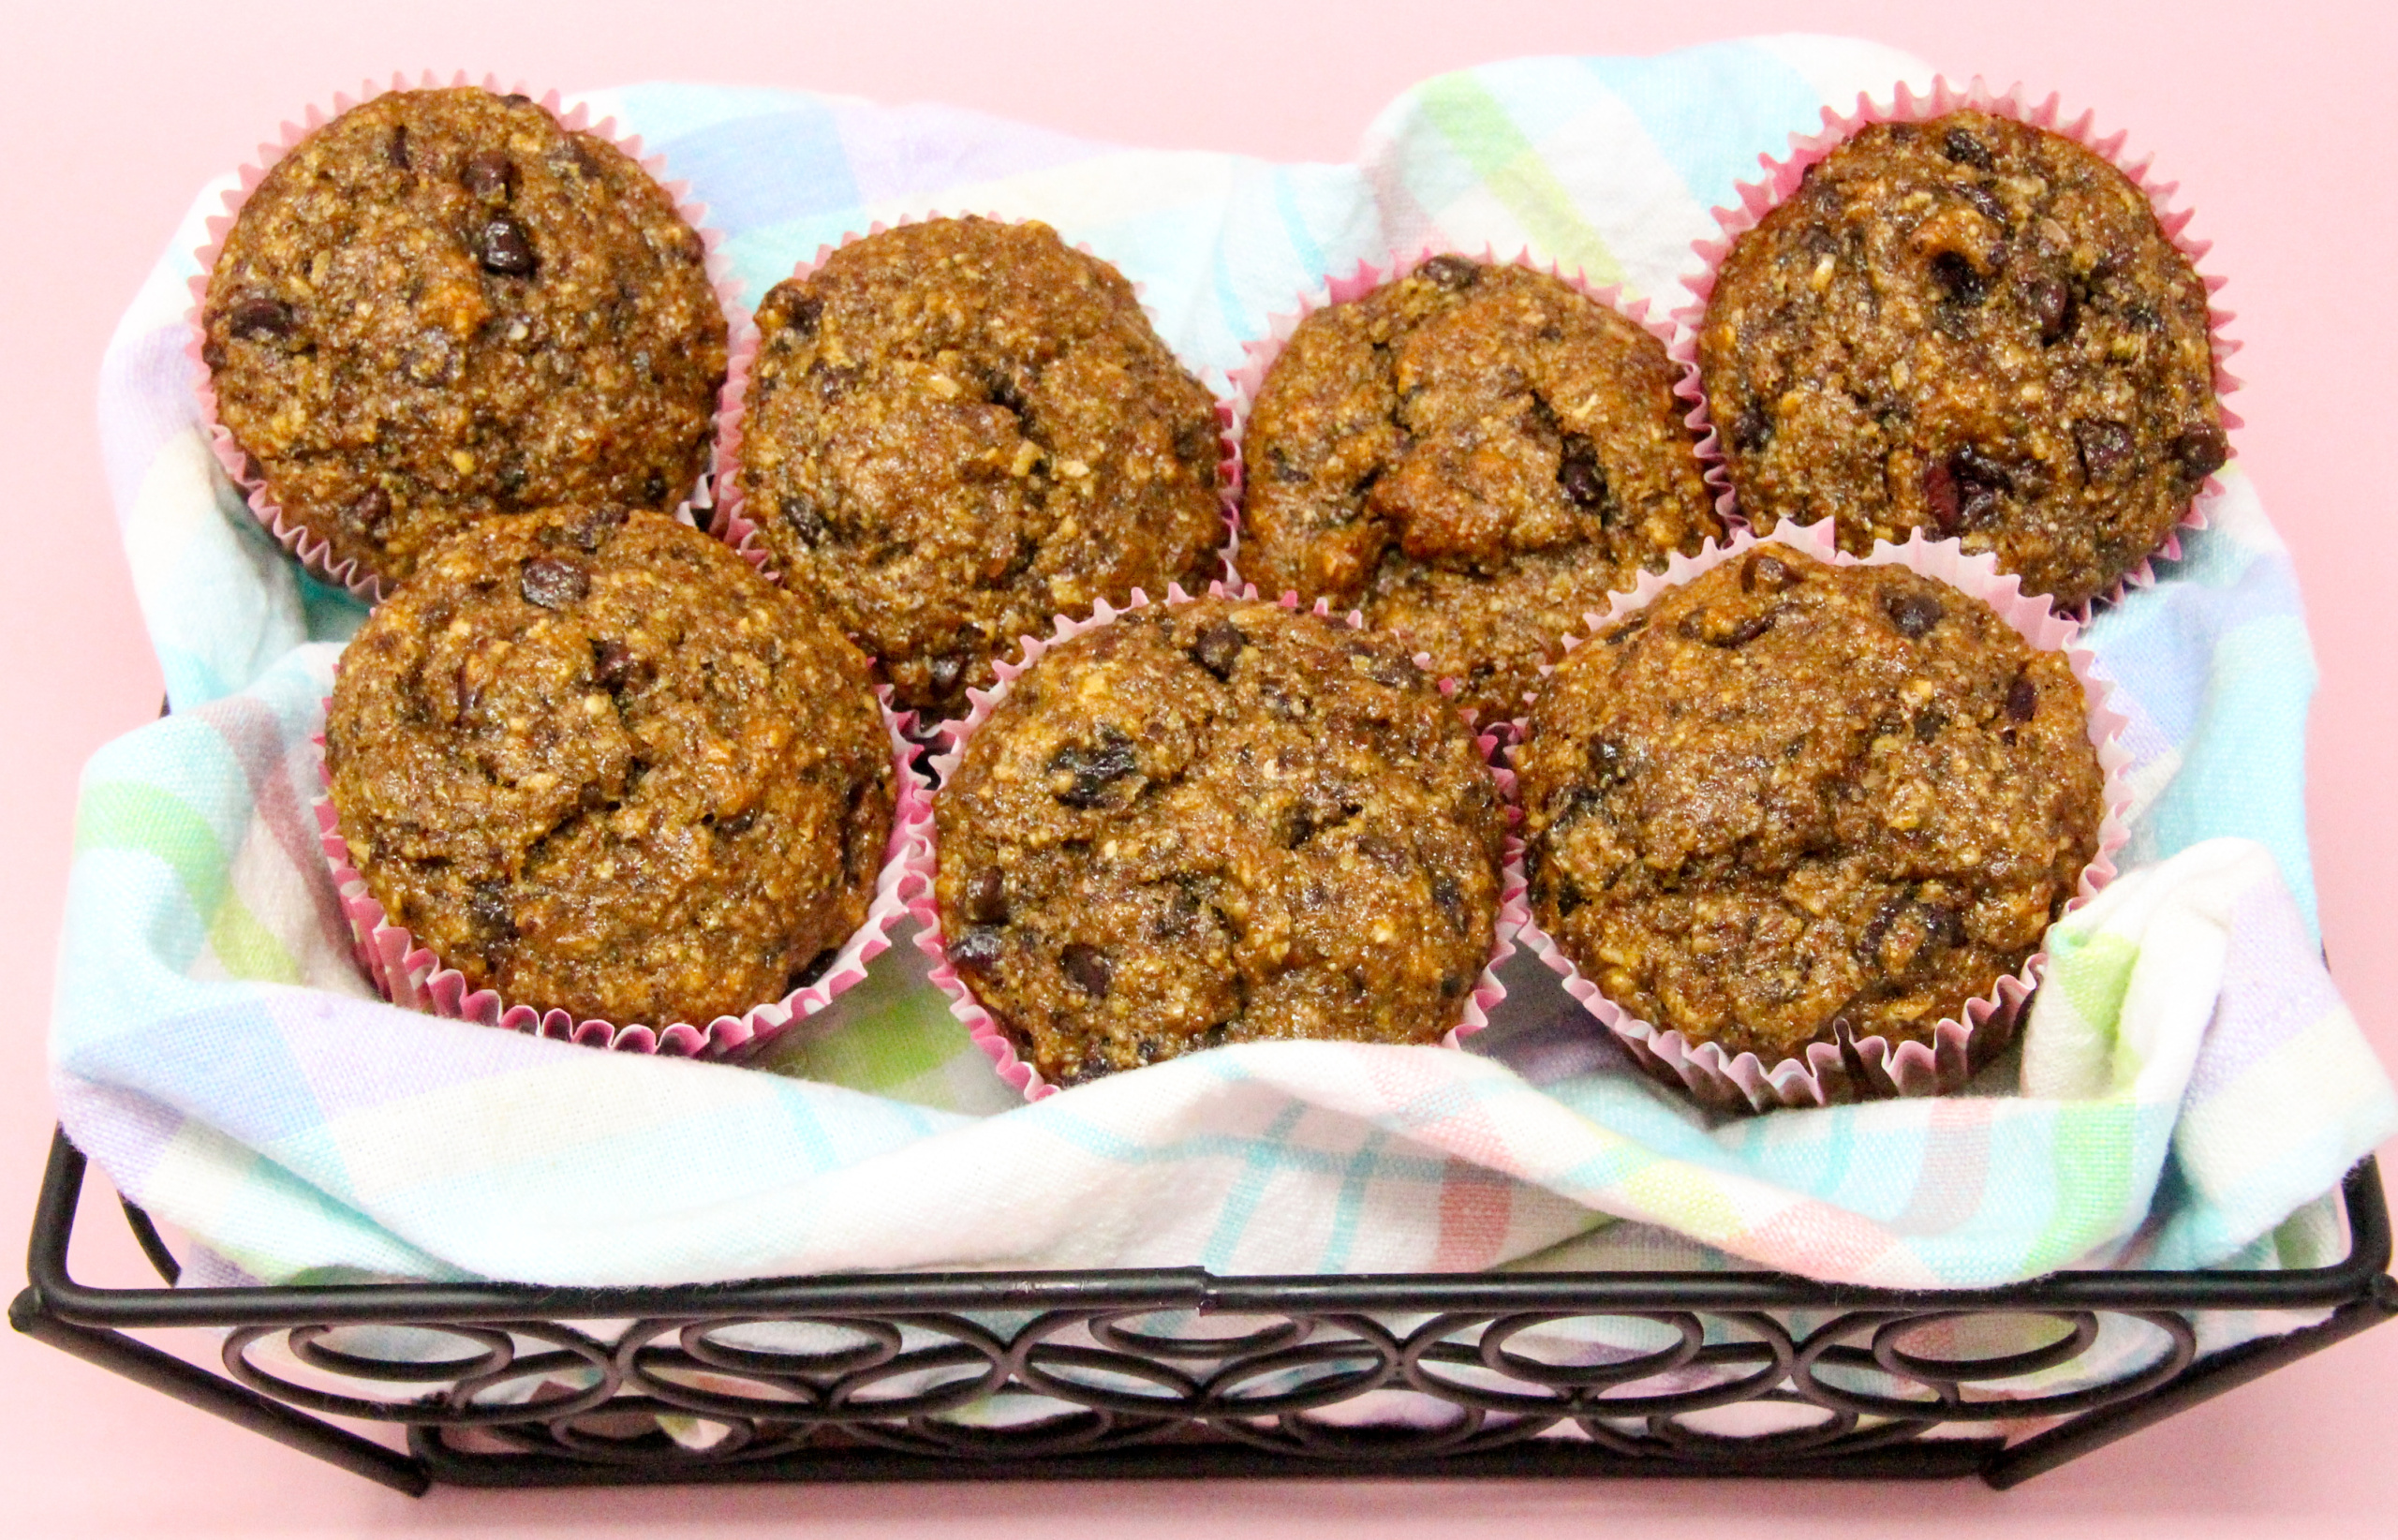 Moon Rock Muffins are chockful of dried plums (which add moistness and sweetness) apple, bananas, whole grains, along with a combination of craisins, raisins, and mini chocolate chips for a hearty yet tasty breakfast or snack. Recipe provided by Cinnamon & Sugar for Mary Karnes, author of WEDDING BRIDE AND DOOM. 